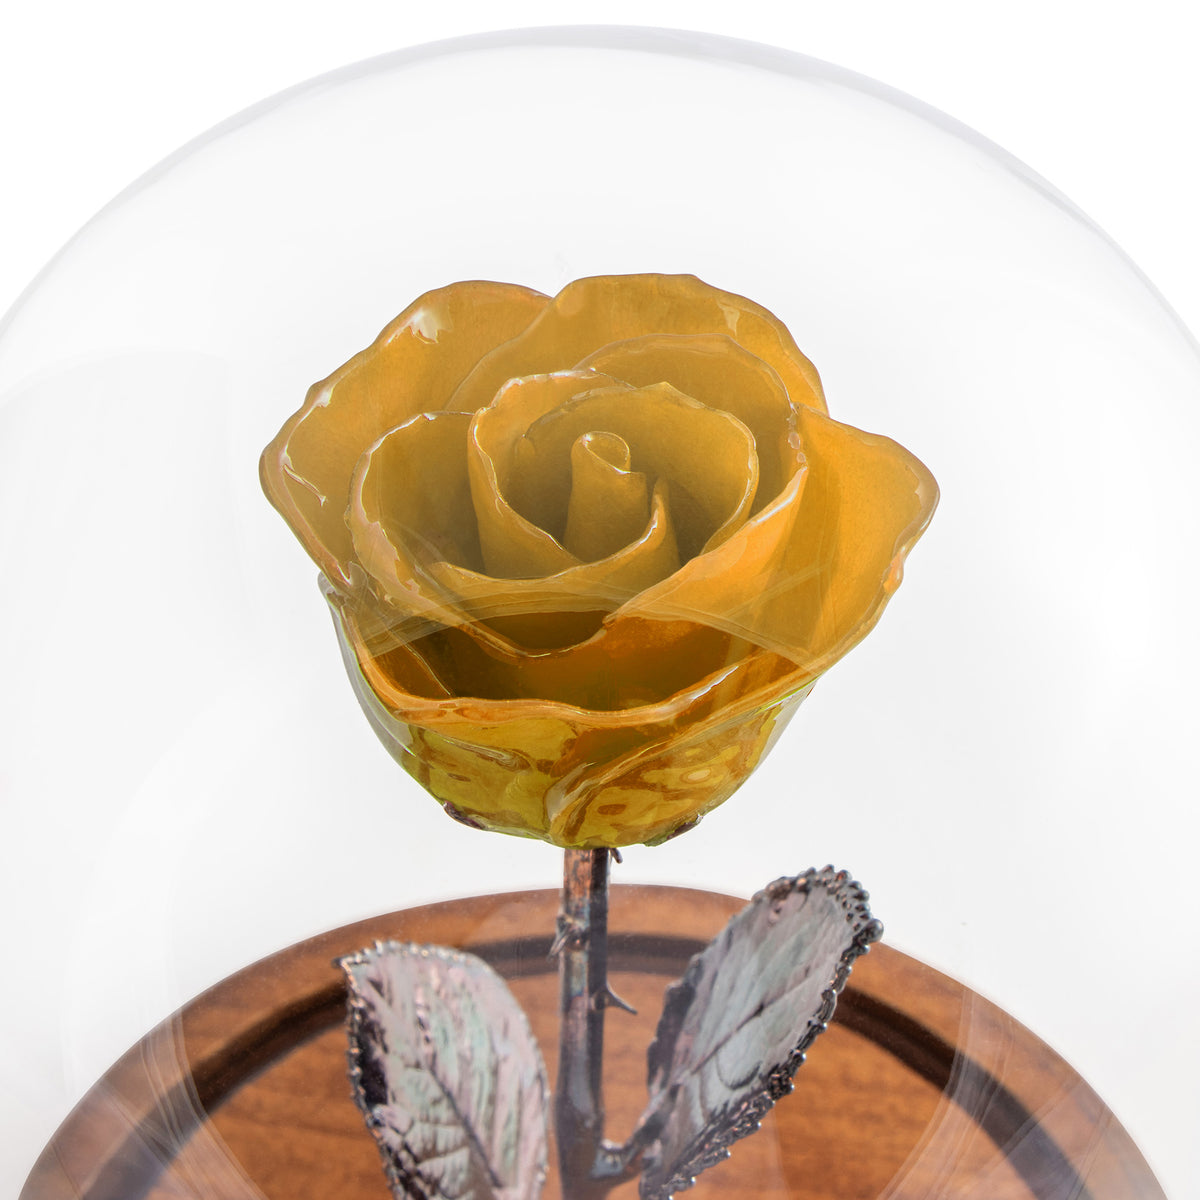 Yellow Enchanted Rose (aka Beauty &amp; The Beast Rose) with Patina Copper Stem Mounted to A Hand Turned Solid Wood Base under a glass dome.